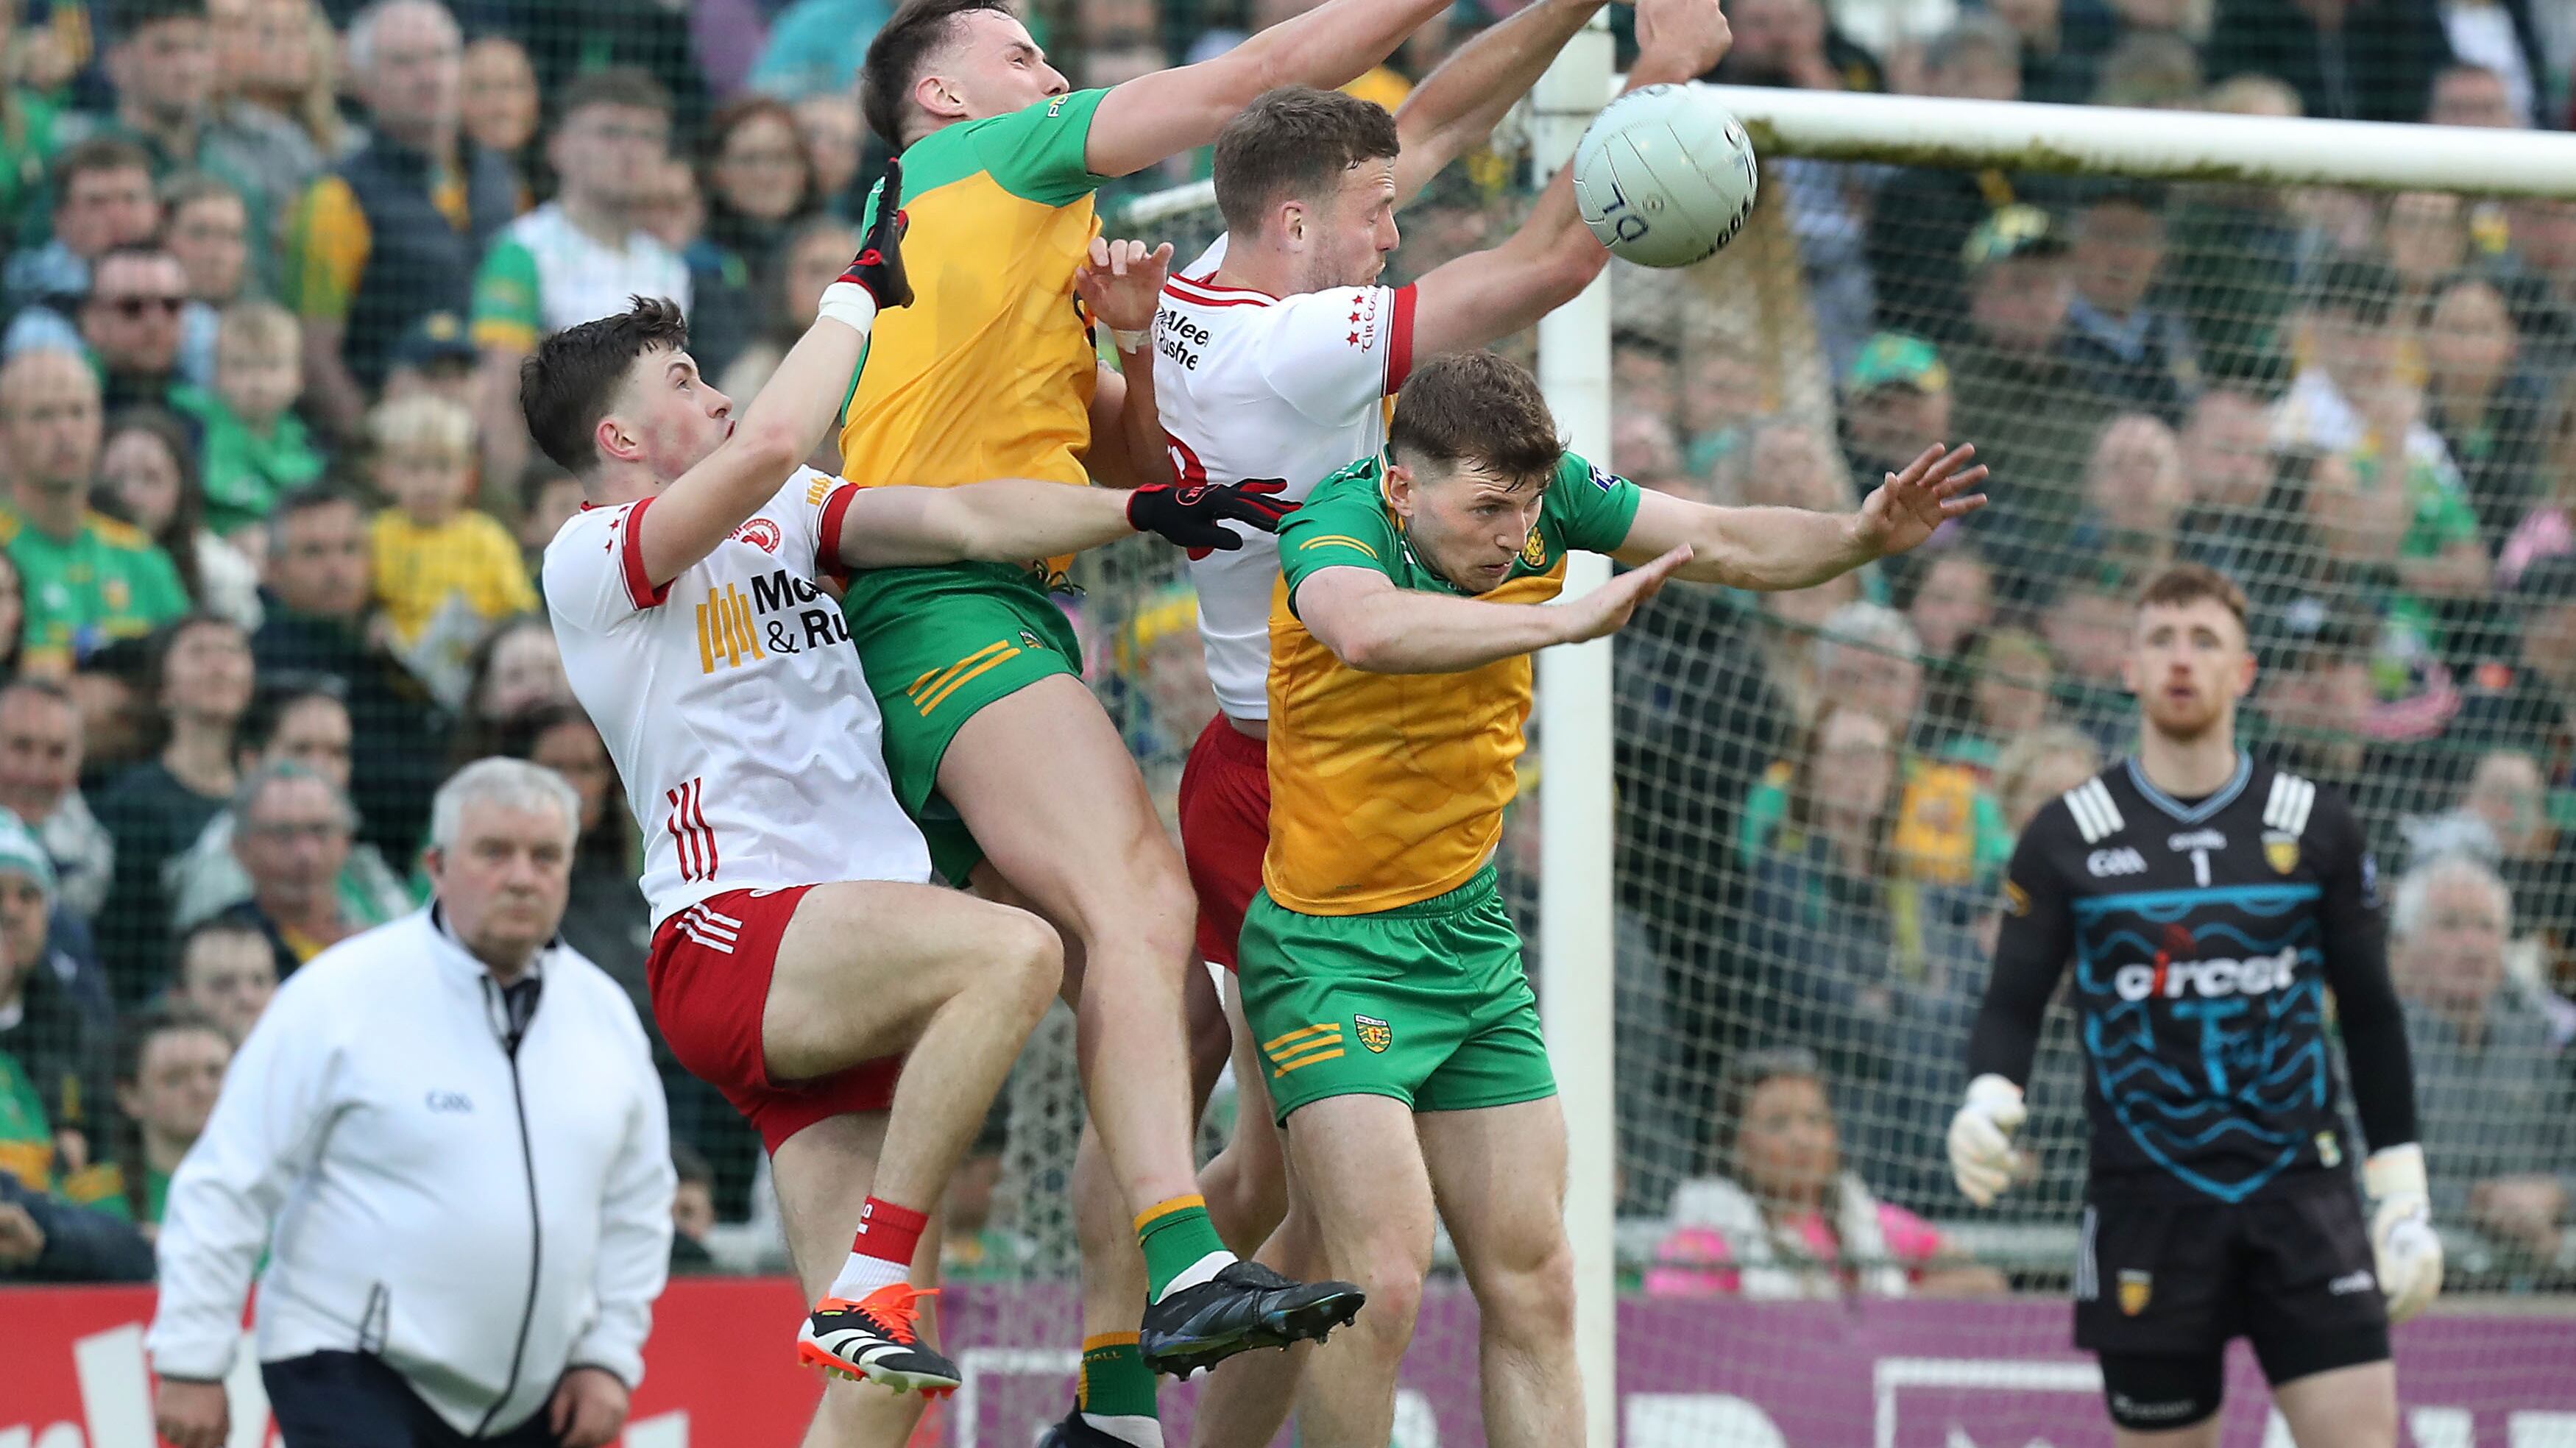 Jason McGee rises for the ball during Donegal's All-Ireland round robin victory over Tyrone in Ballybofey on Saturday night. Picture by Margaret McLaughlin